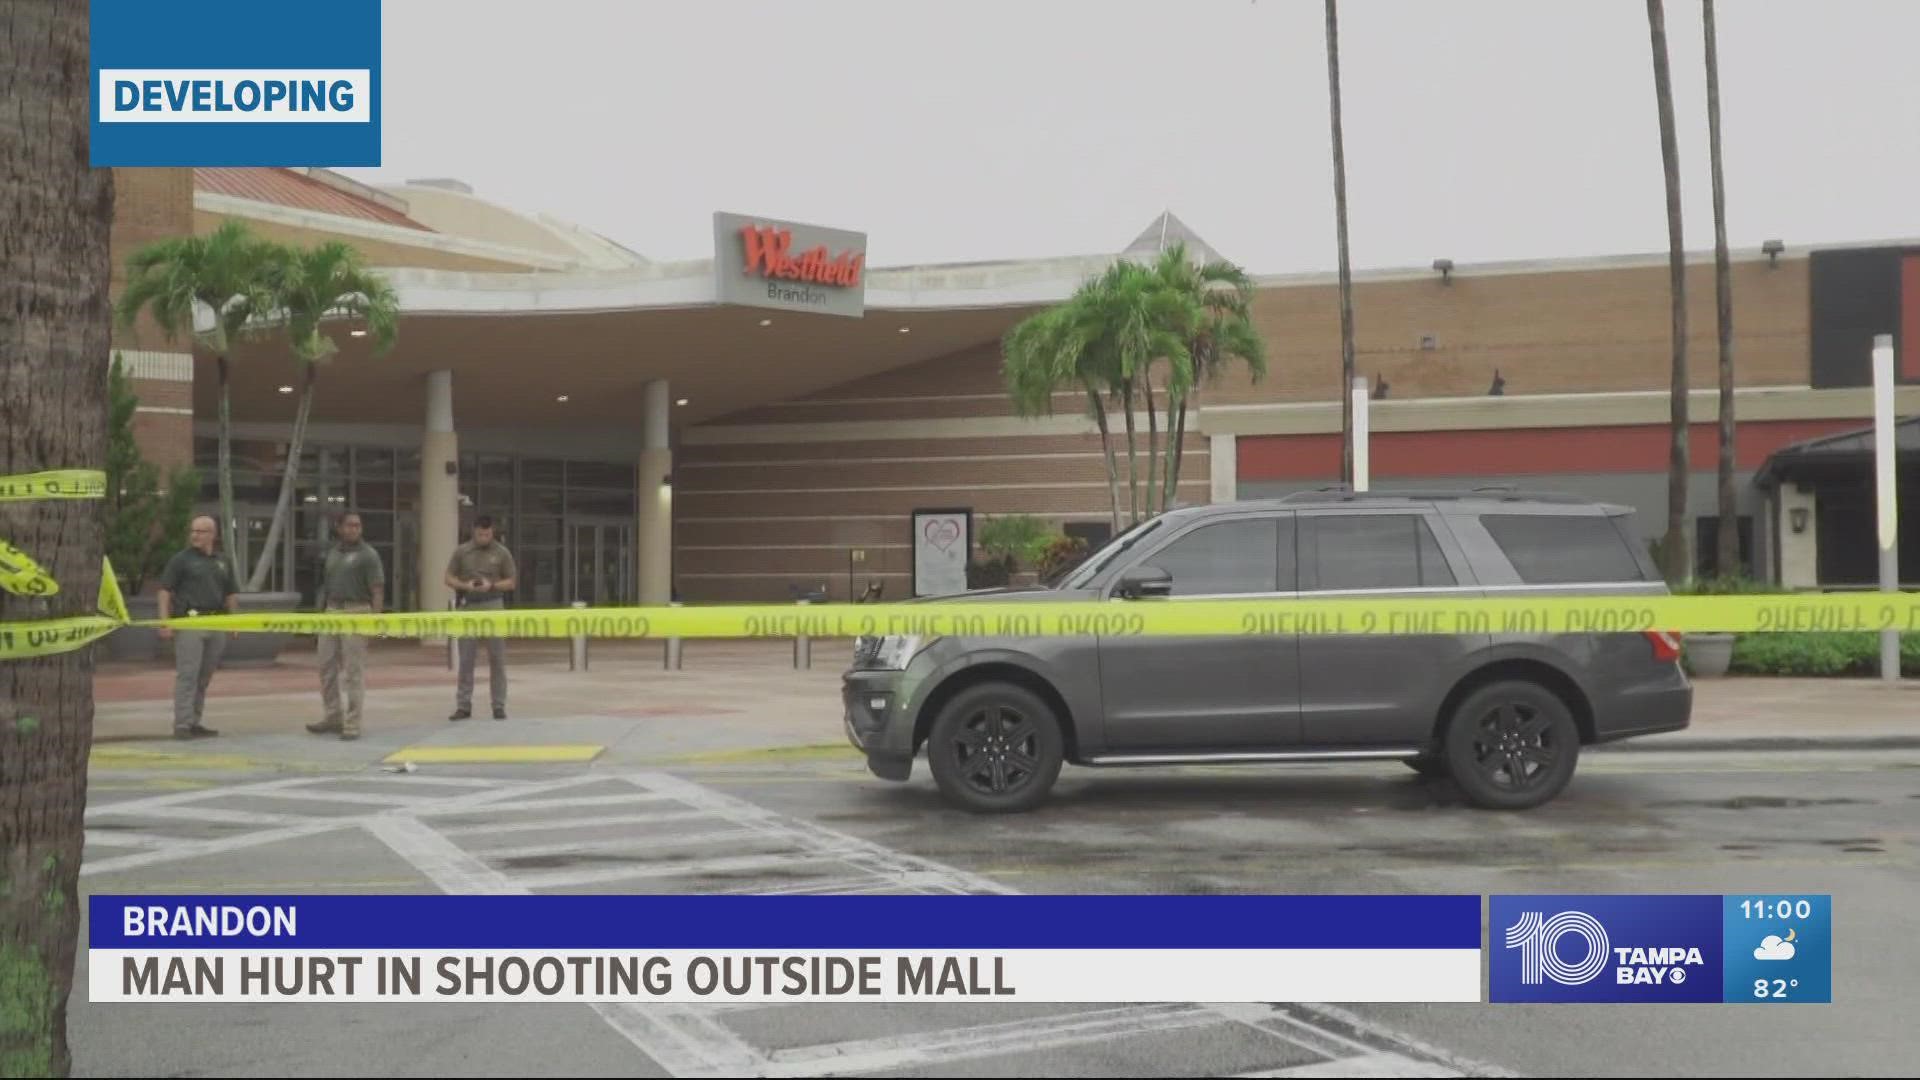 Two men arguing inside the mall continued outside, with one firing a weapon, according to a sheriff's office spokesperson.